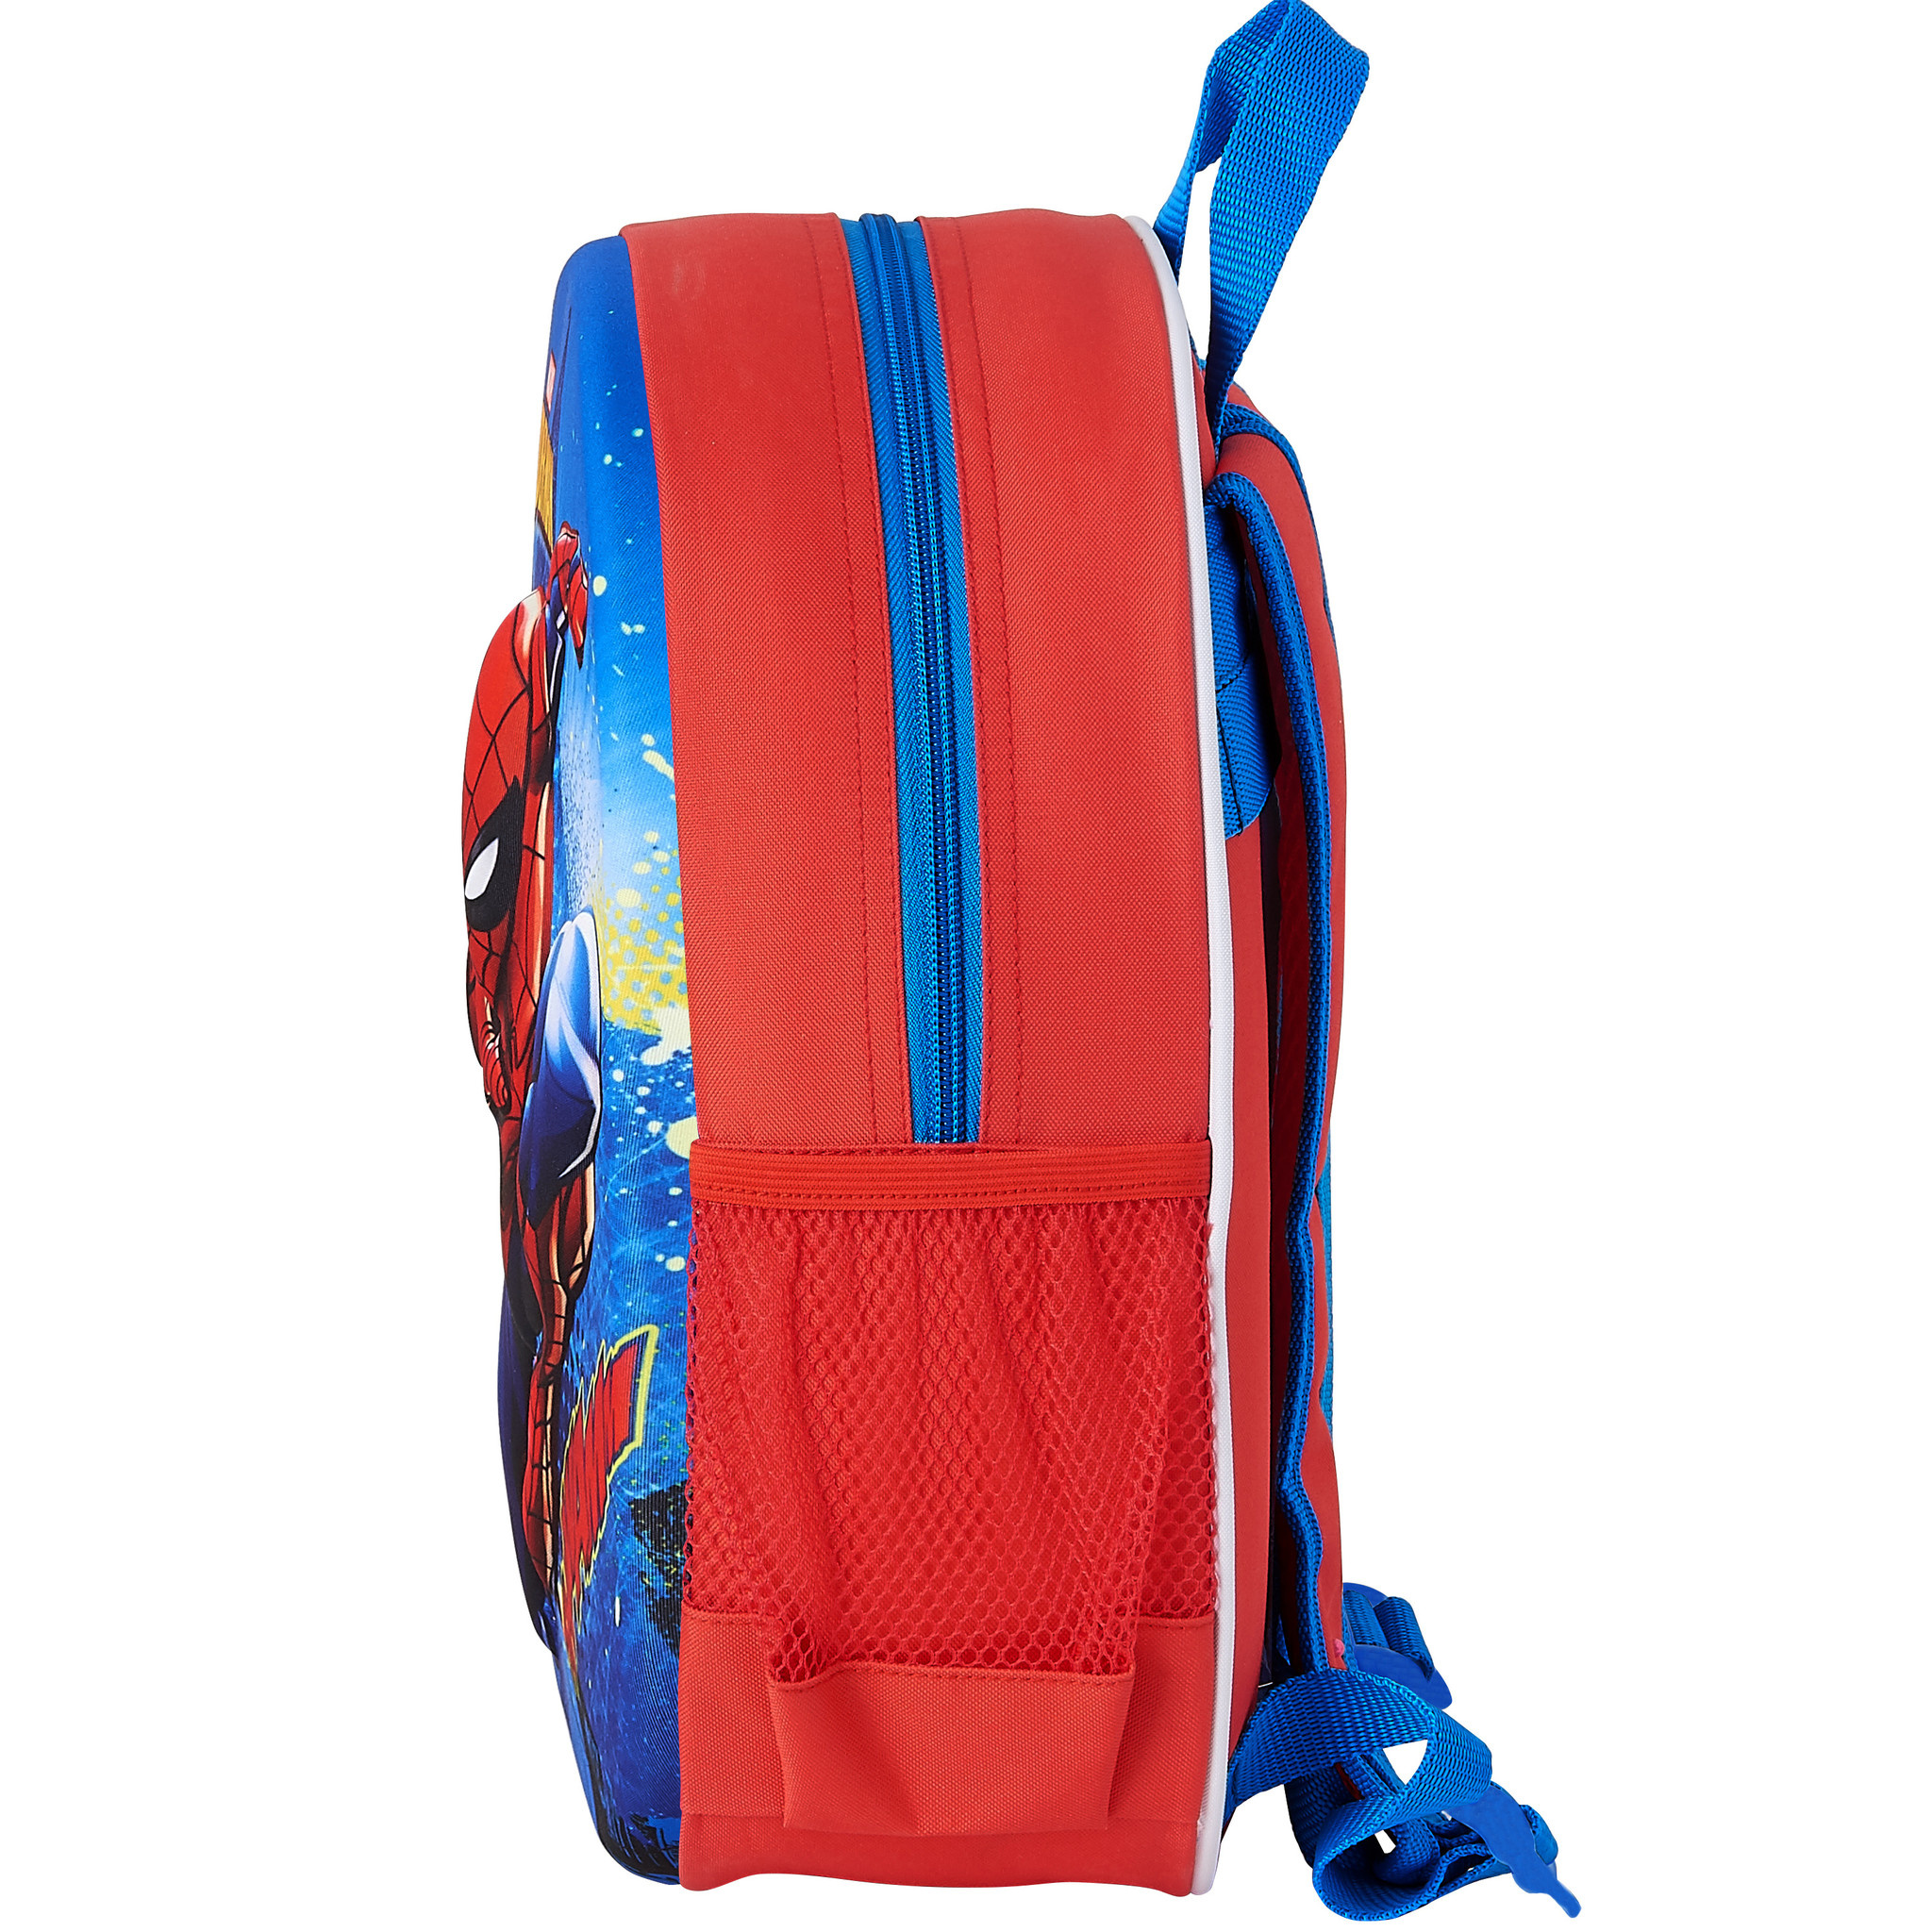 Spiderman Backpack 3D Great Power - 33 x 27 x 10 cm - Polyester